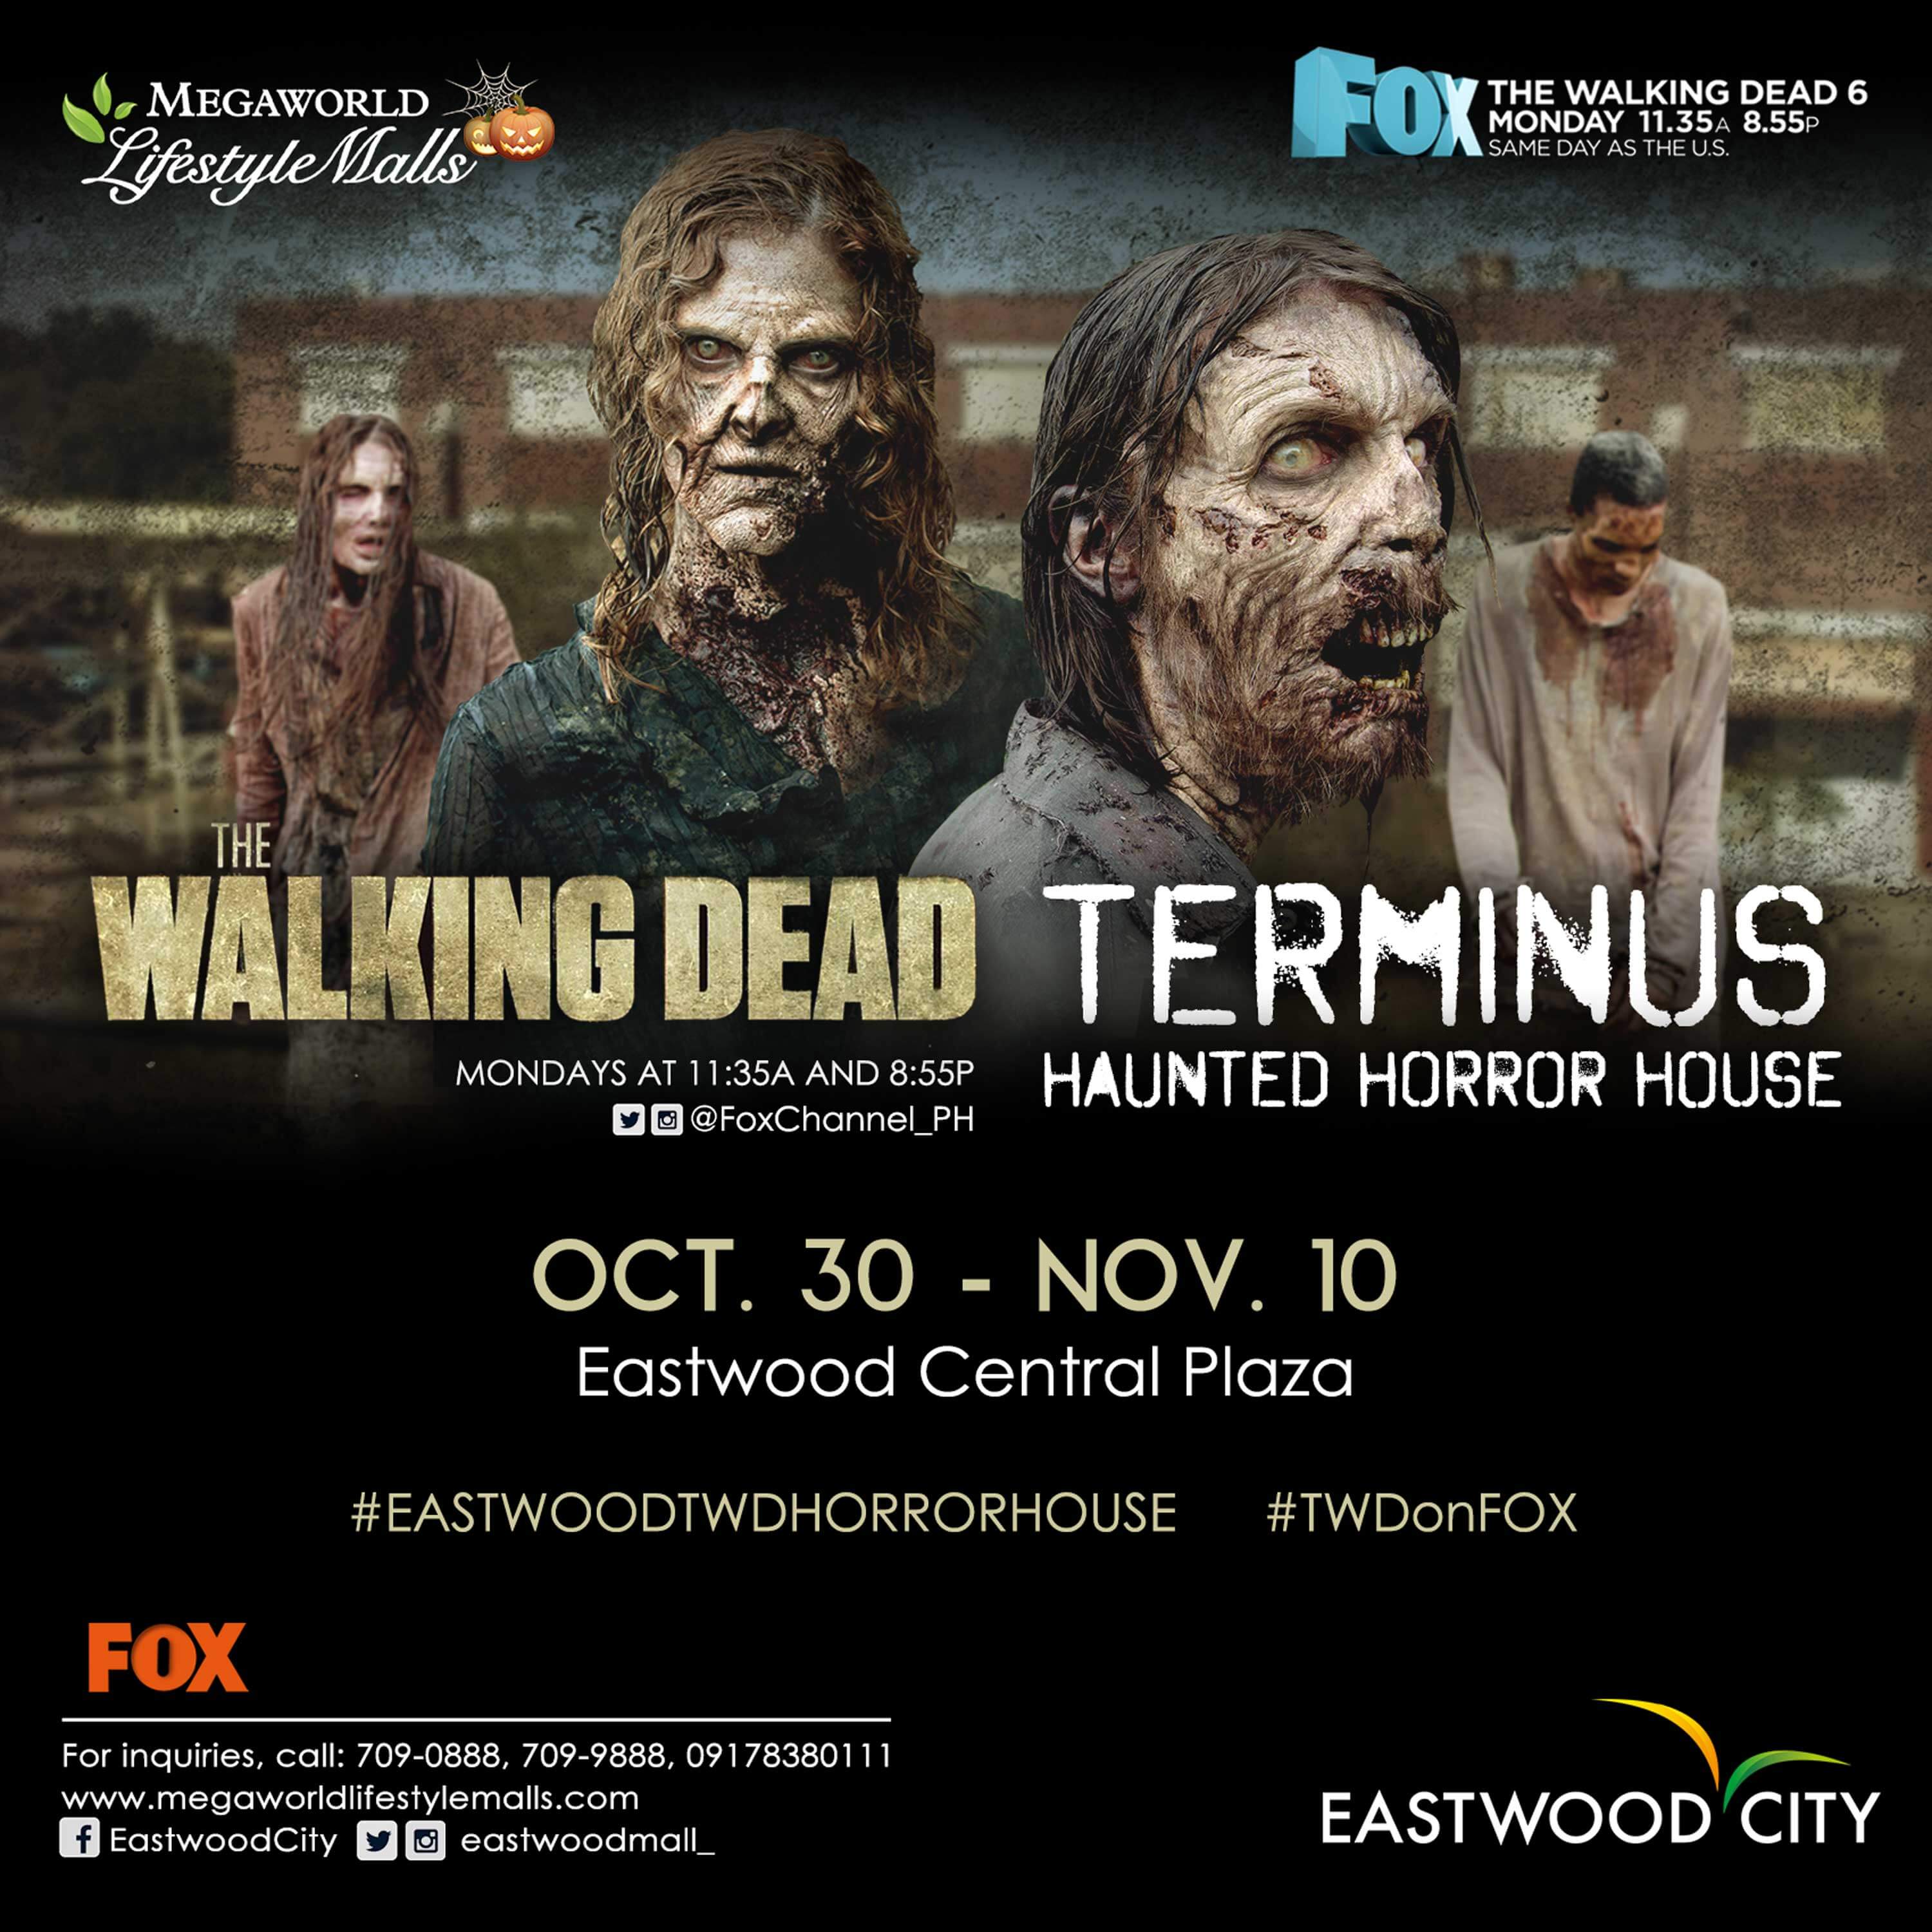 Conquer, Survive Eastwood City’s ‘The Walking Dead: Terminus Haunted Horror House’